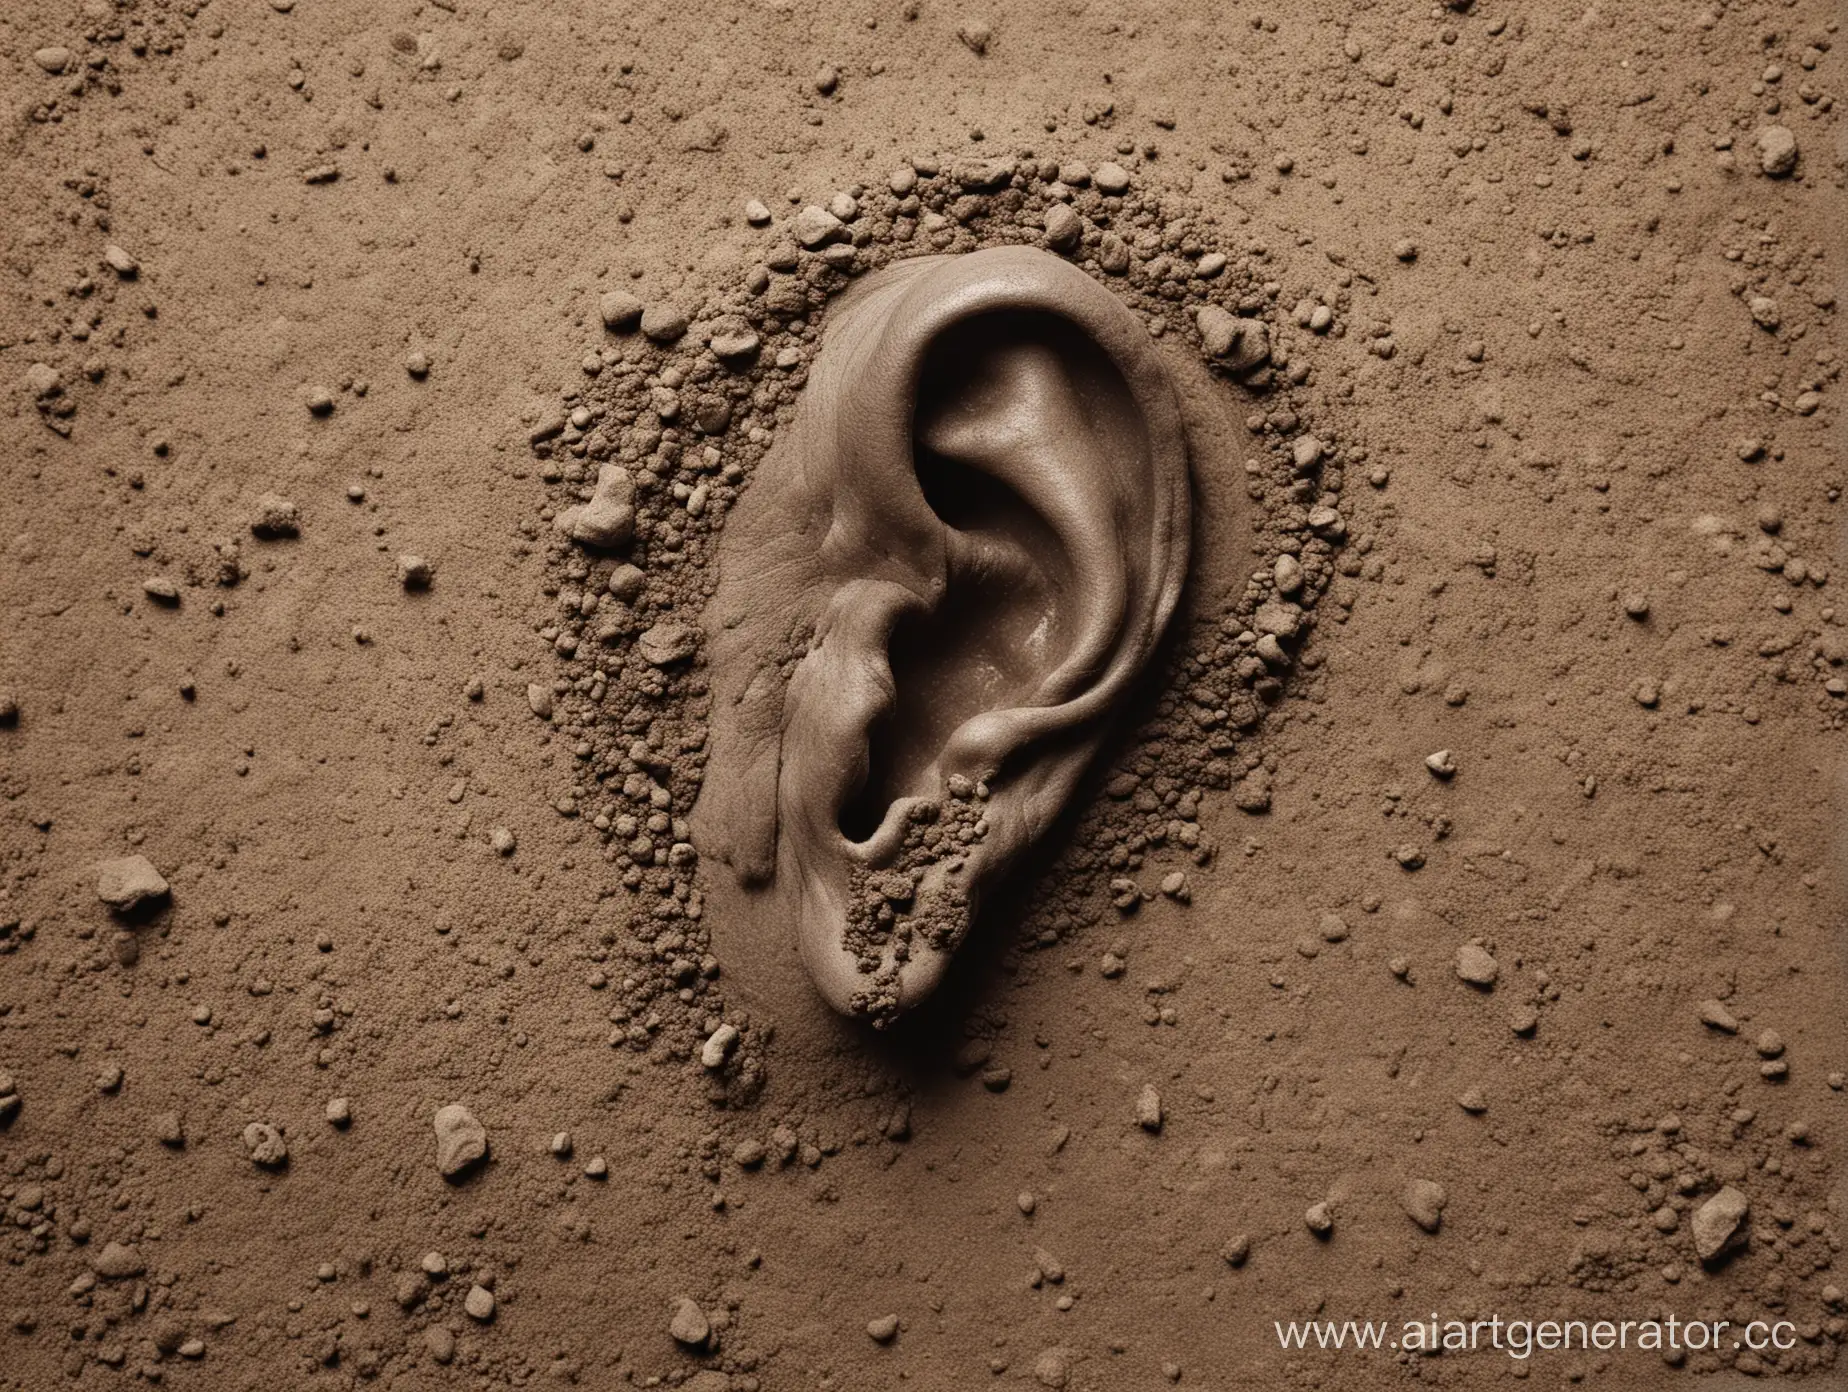 Ear-and-Soil-Minimalistic-Abstraction-by-Roger-Ballen